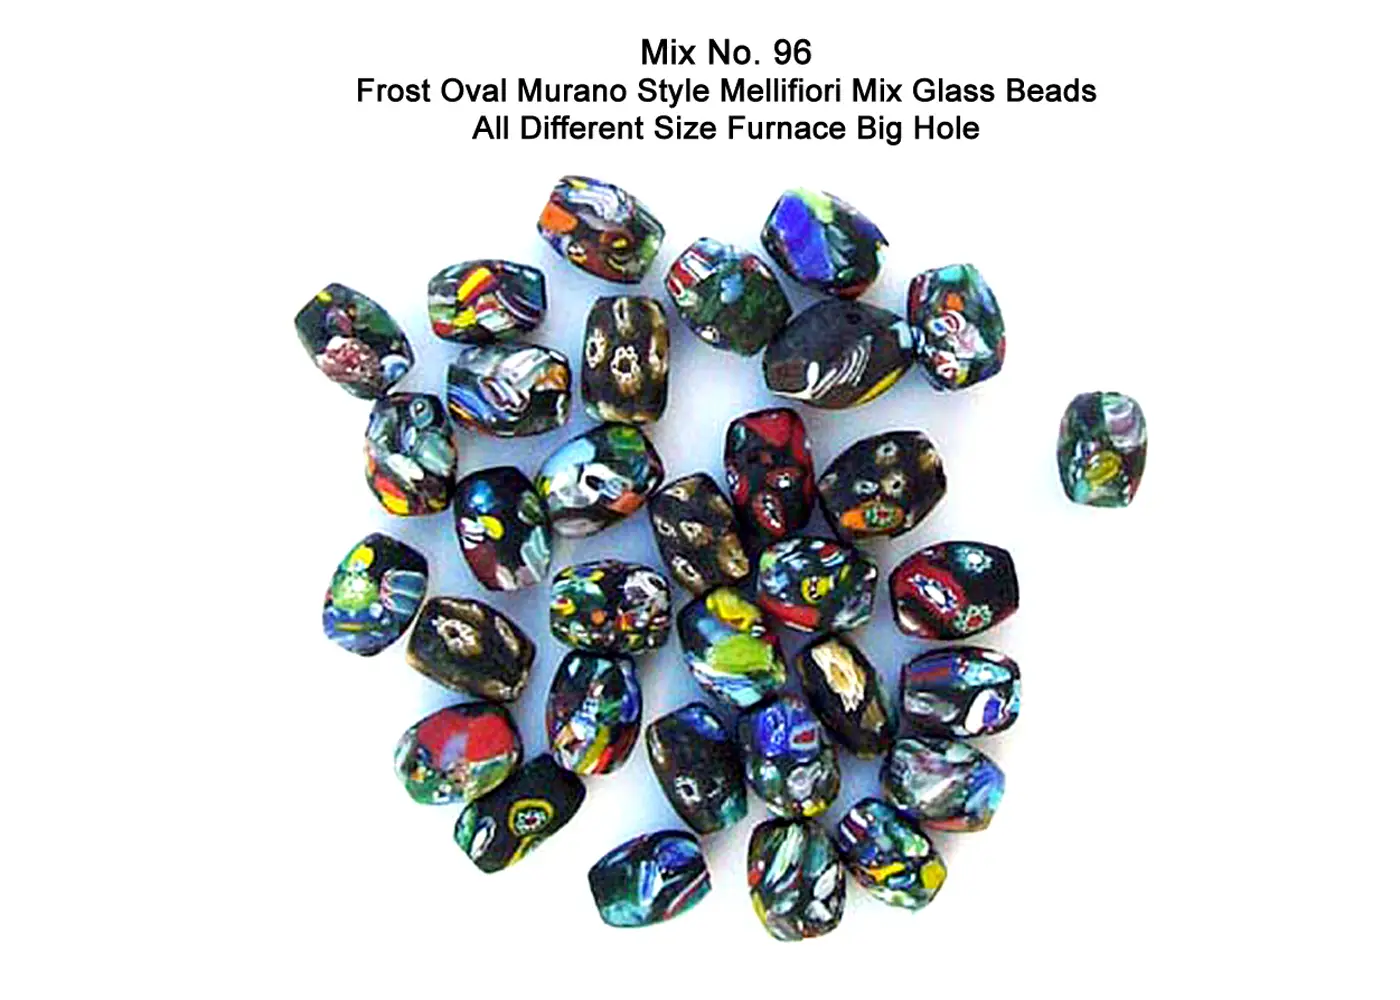 Frost oval Murano style mellifiori mix glass beads all different size furnace big hole